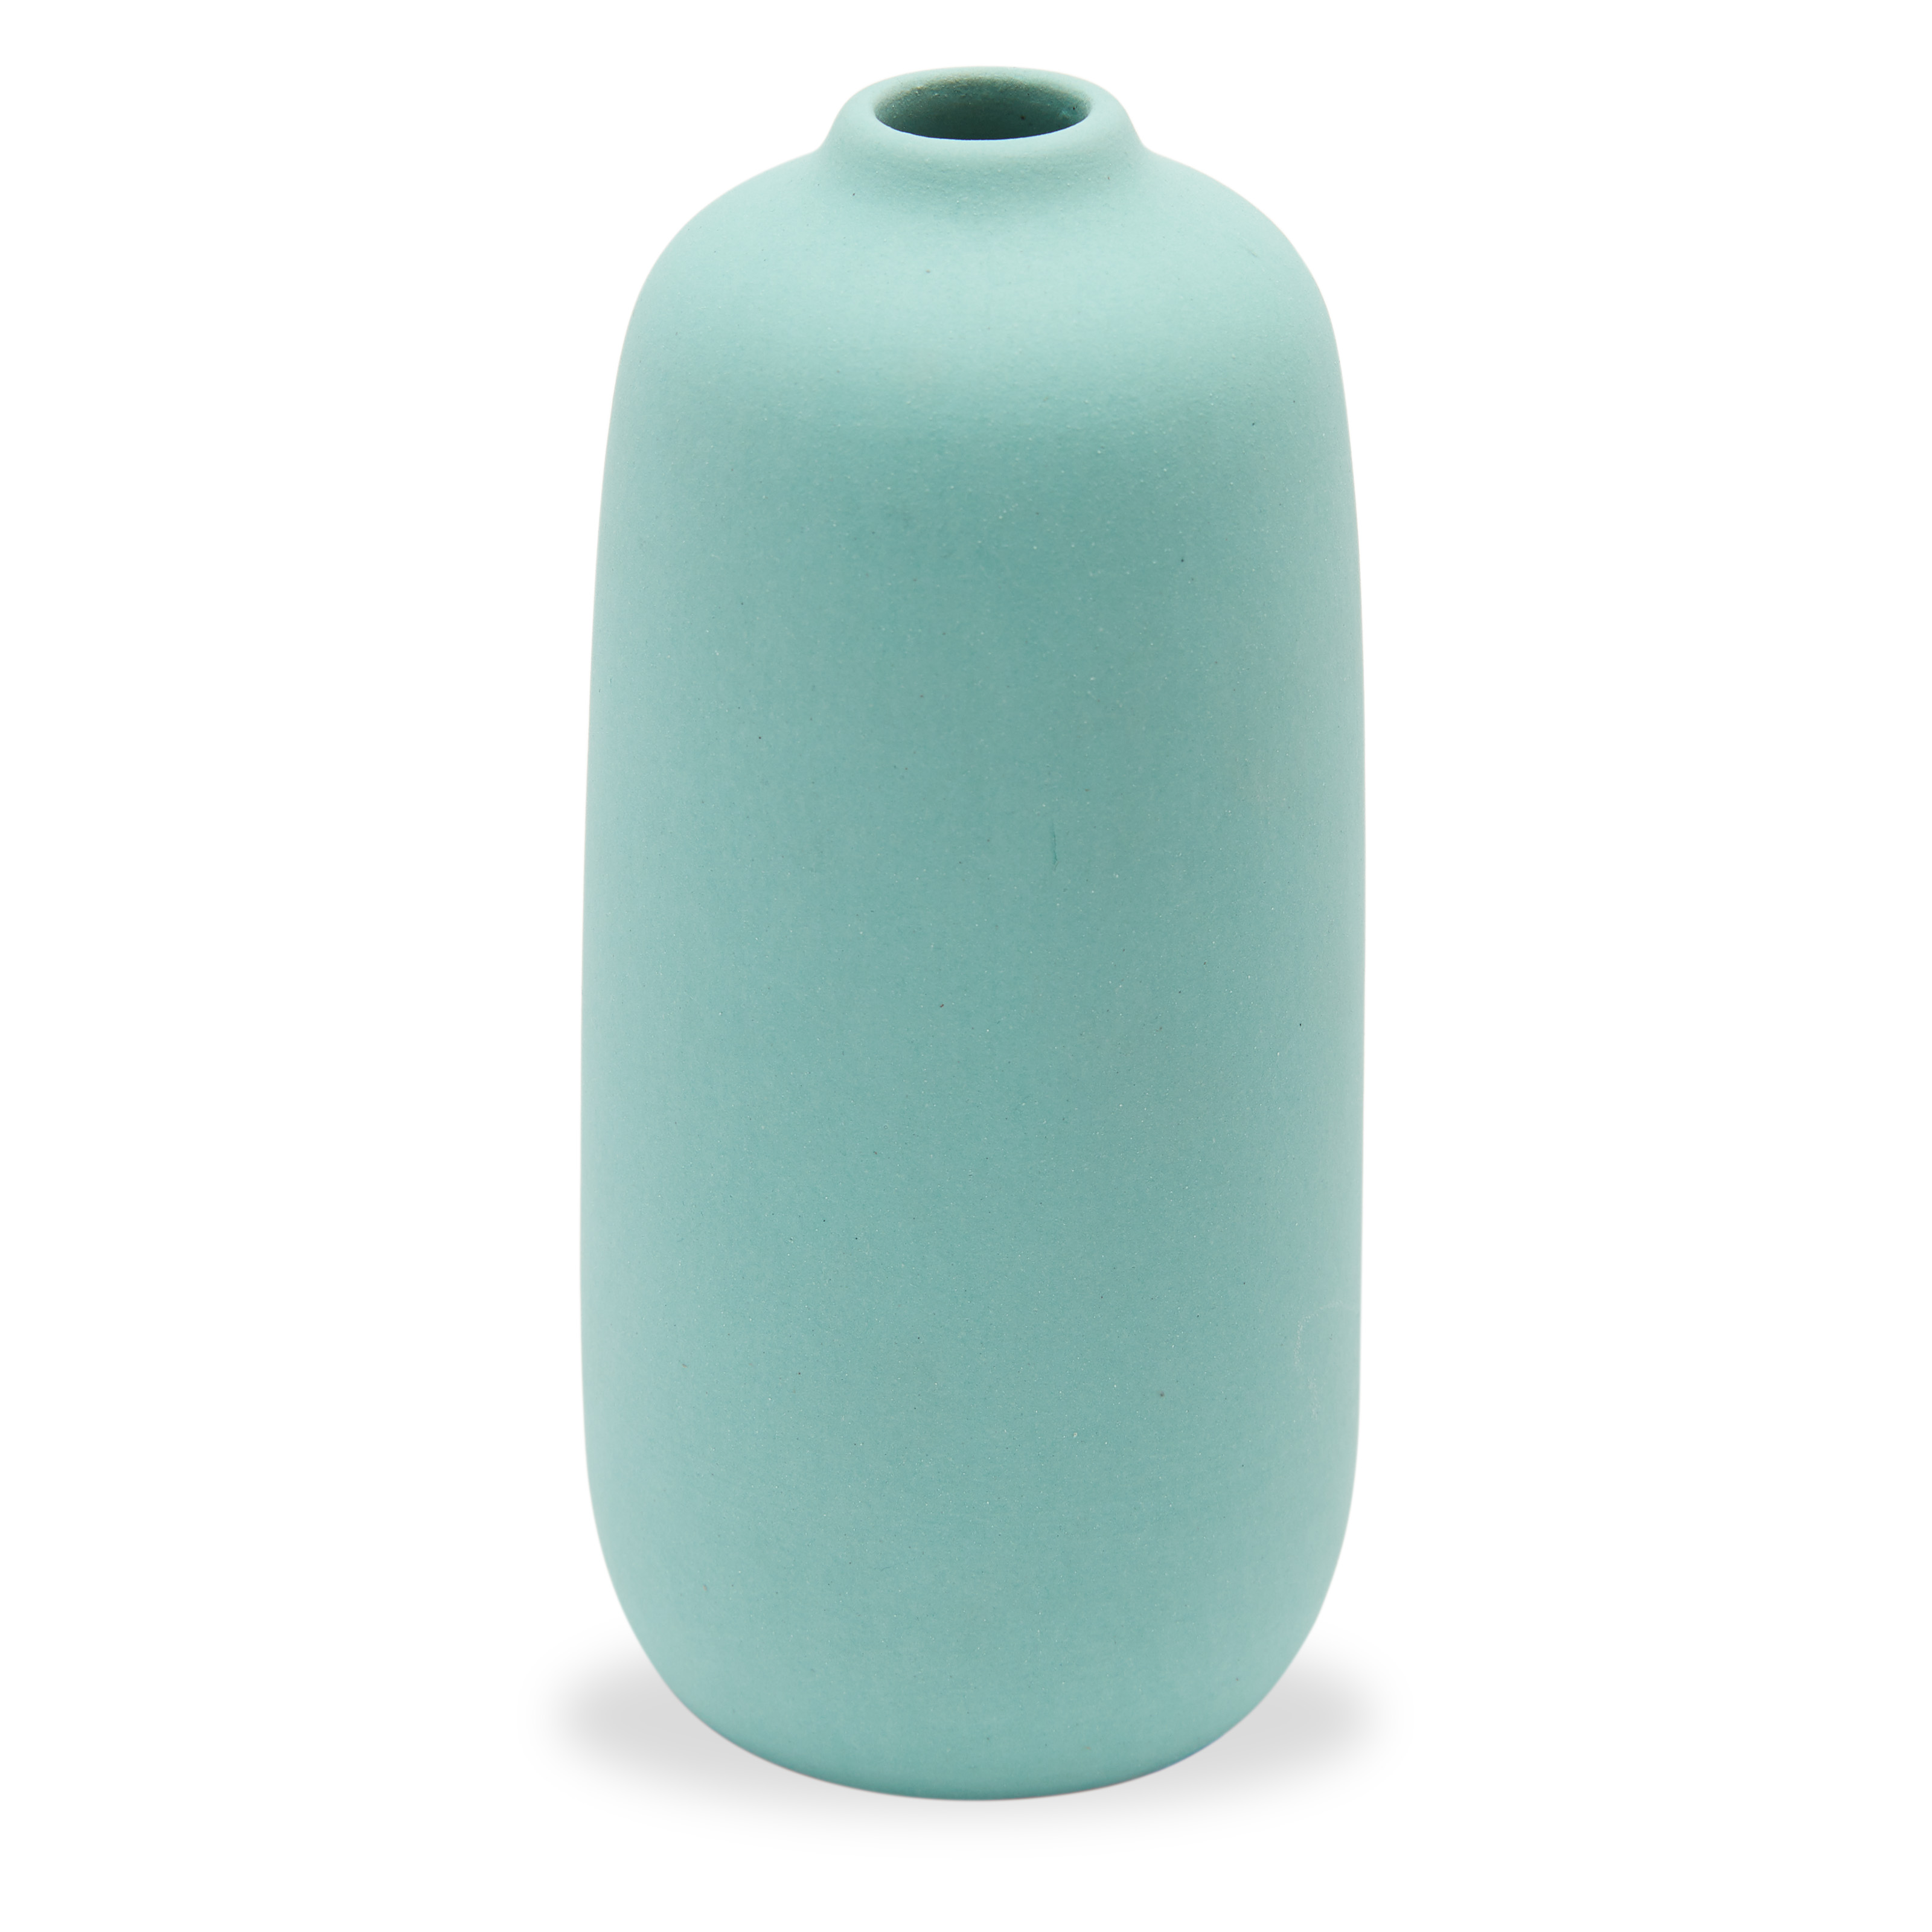 Galway Green Decorative Vase by Drew Barrymore Flower Home - image 1 of 7